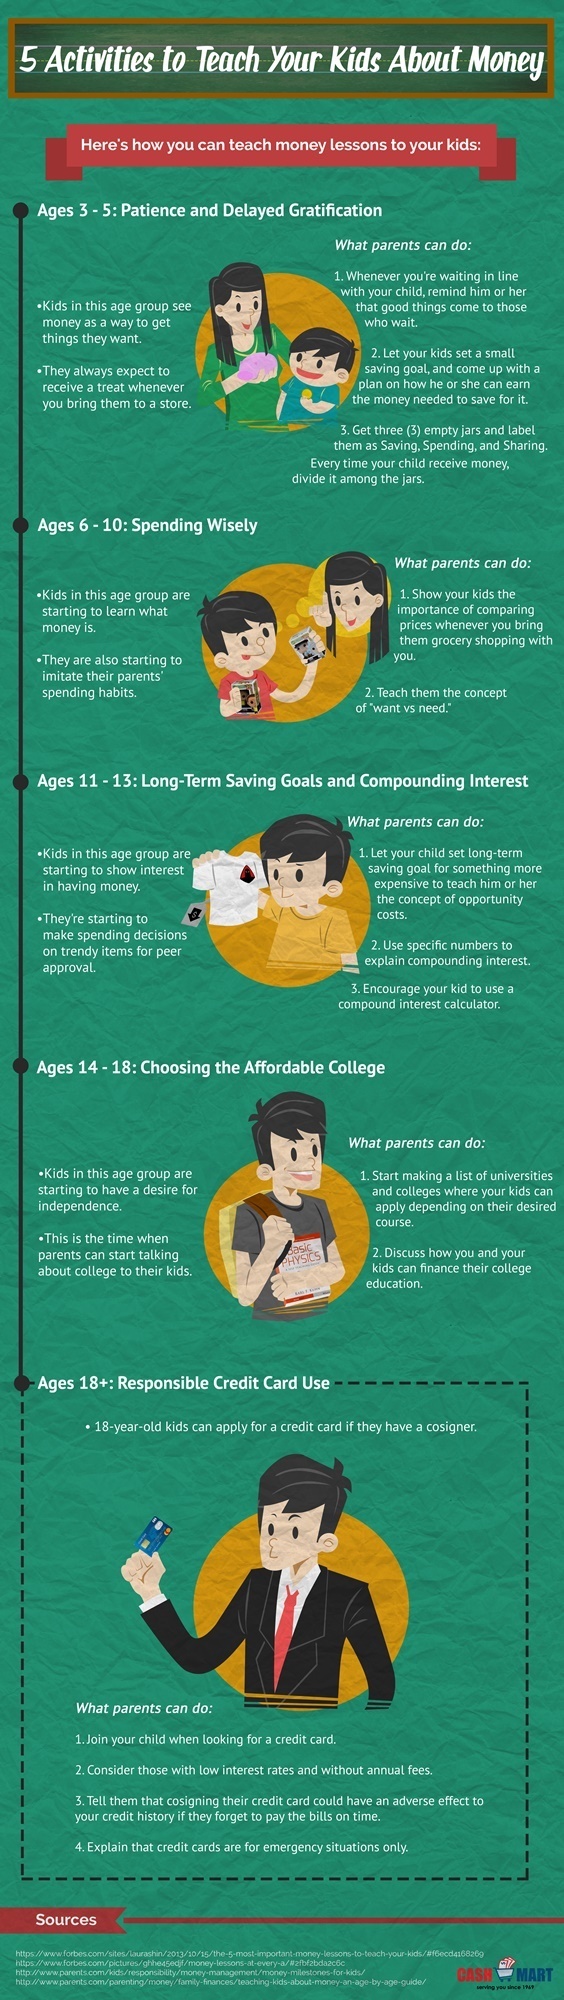 5 Activities to Teach Your Kids about Money Infographic